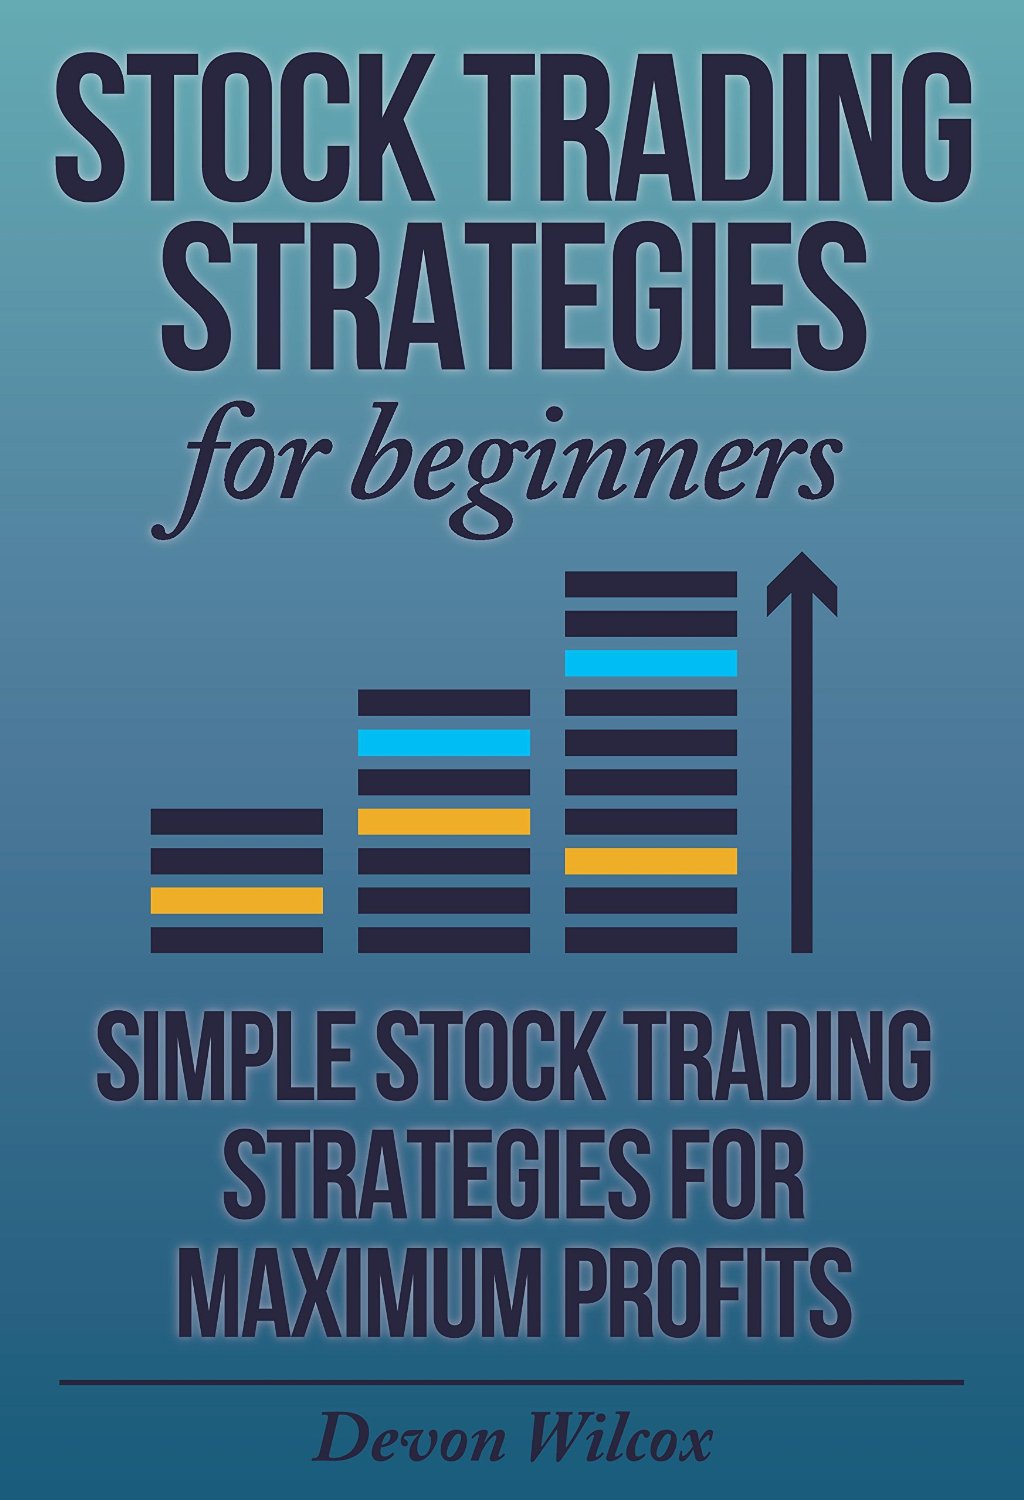 Stock Trading Strategies For Beginners: Simple Stock Trading Strategies For Maximum Profits by Devon Wilcox